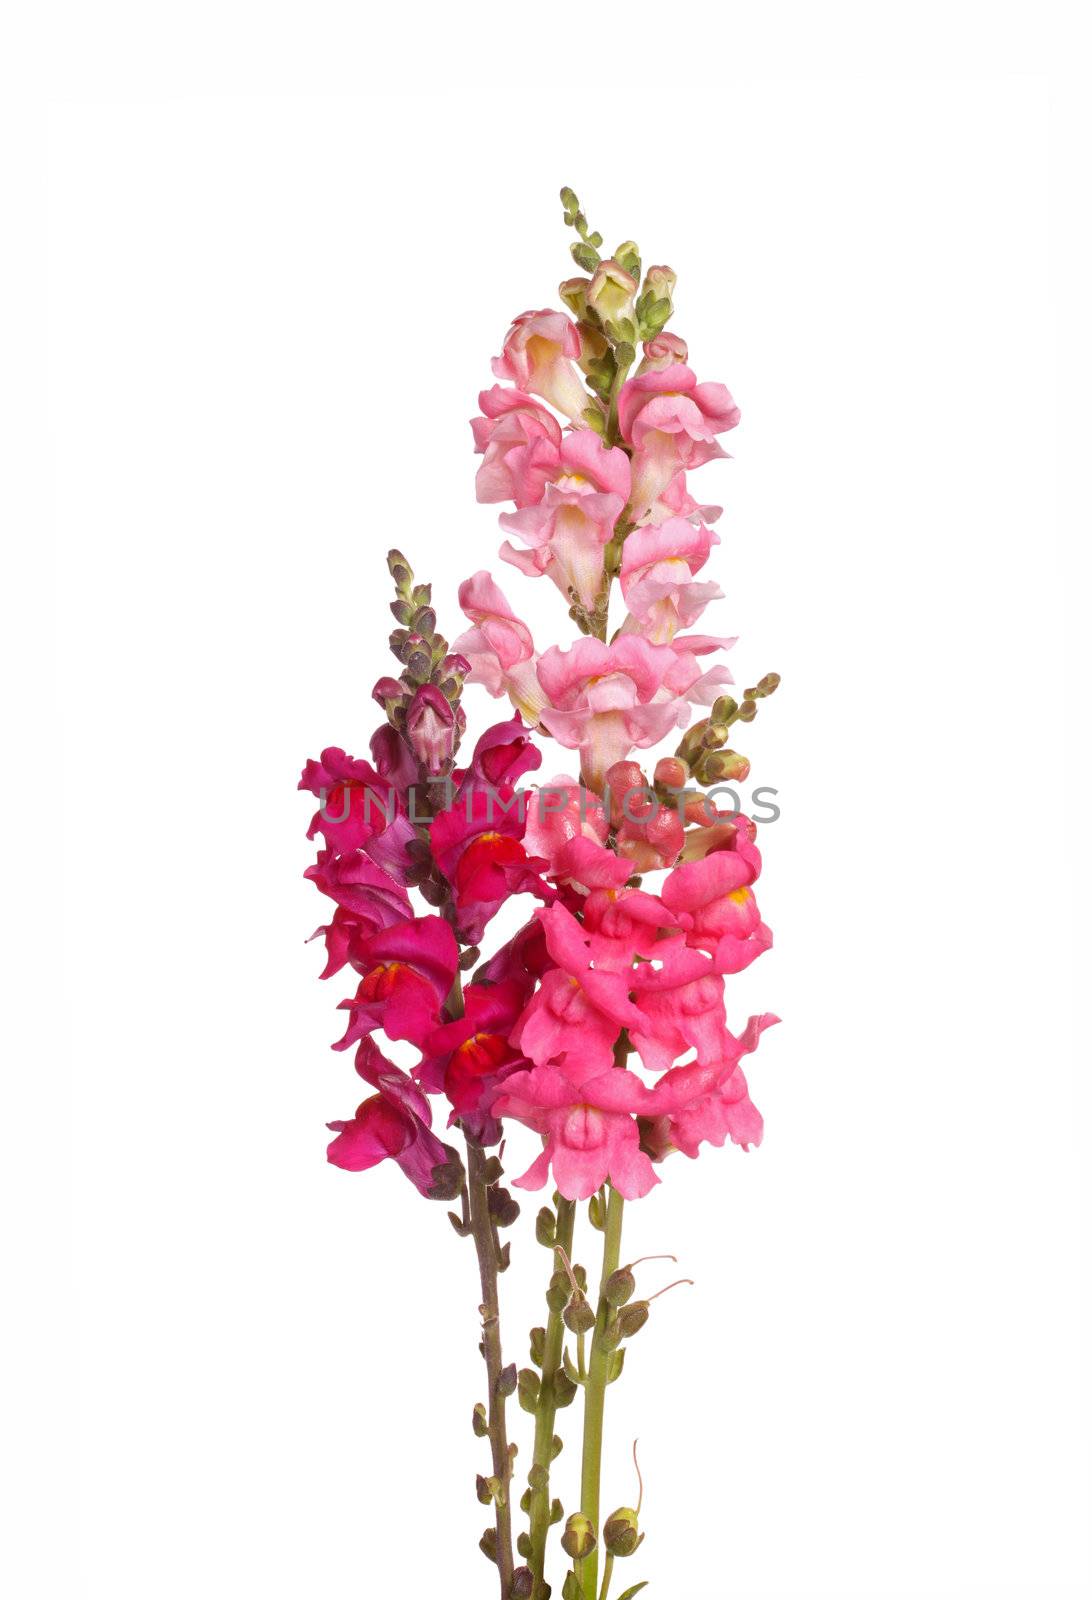 Three stems with pink, red, purple and yellow flowers of snapdragons (Antirrhinum majus) isolated against a white background